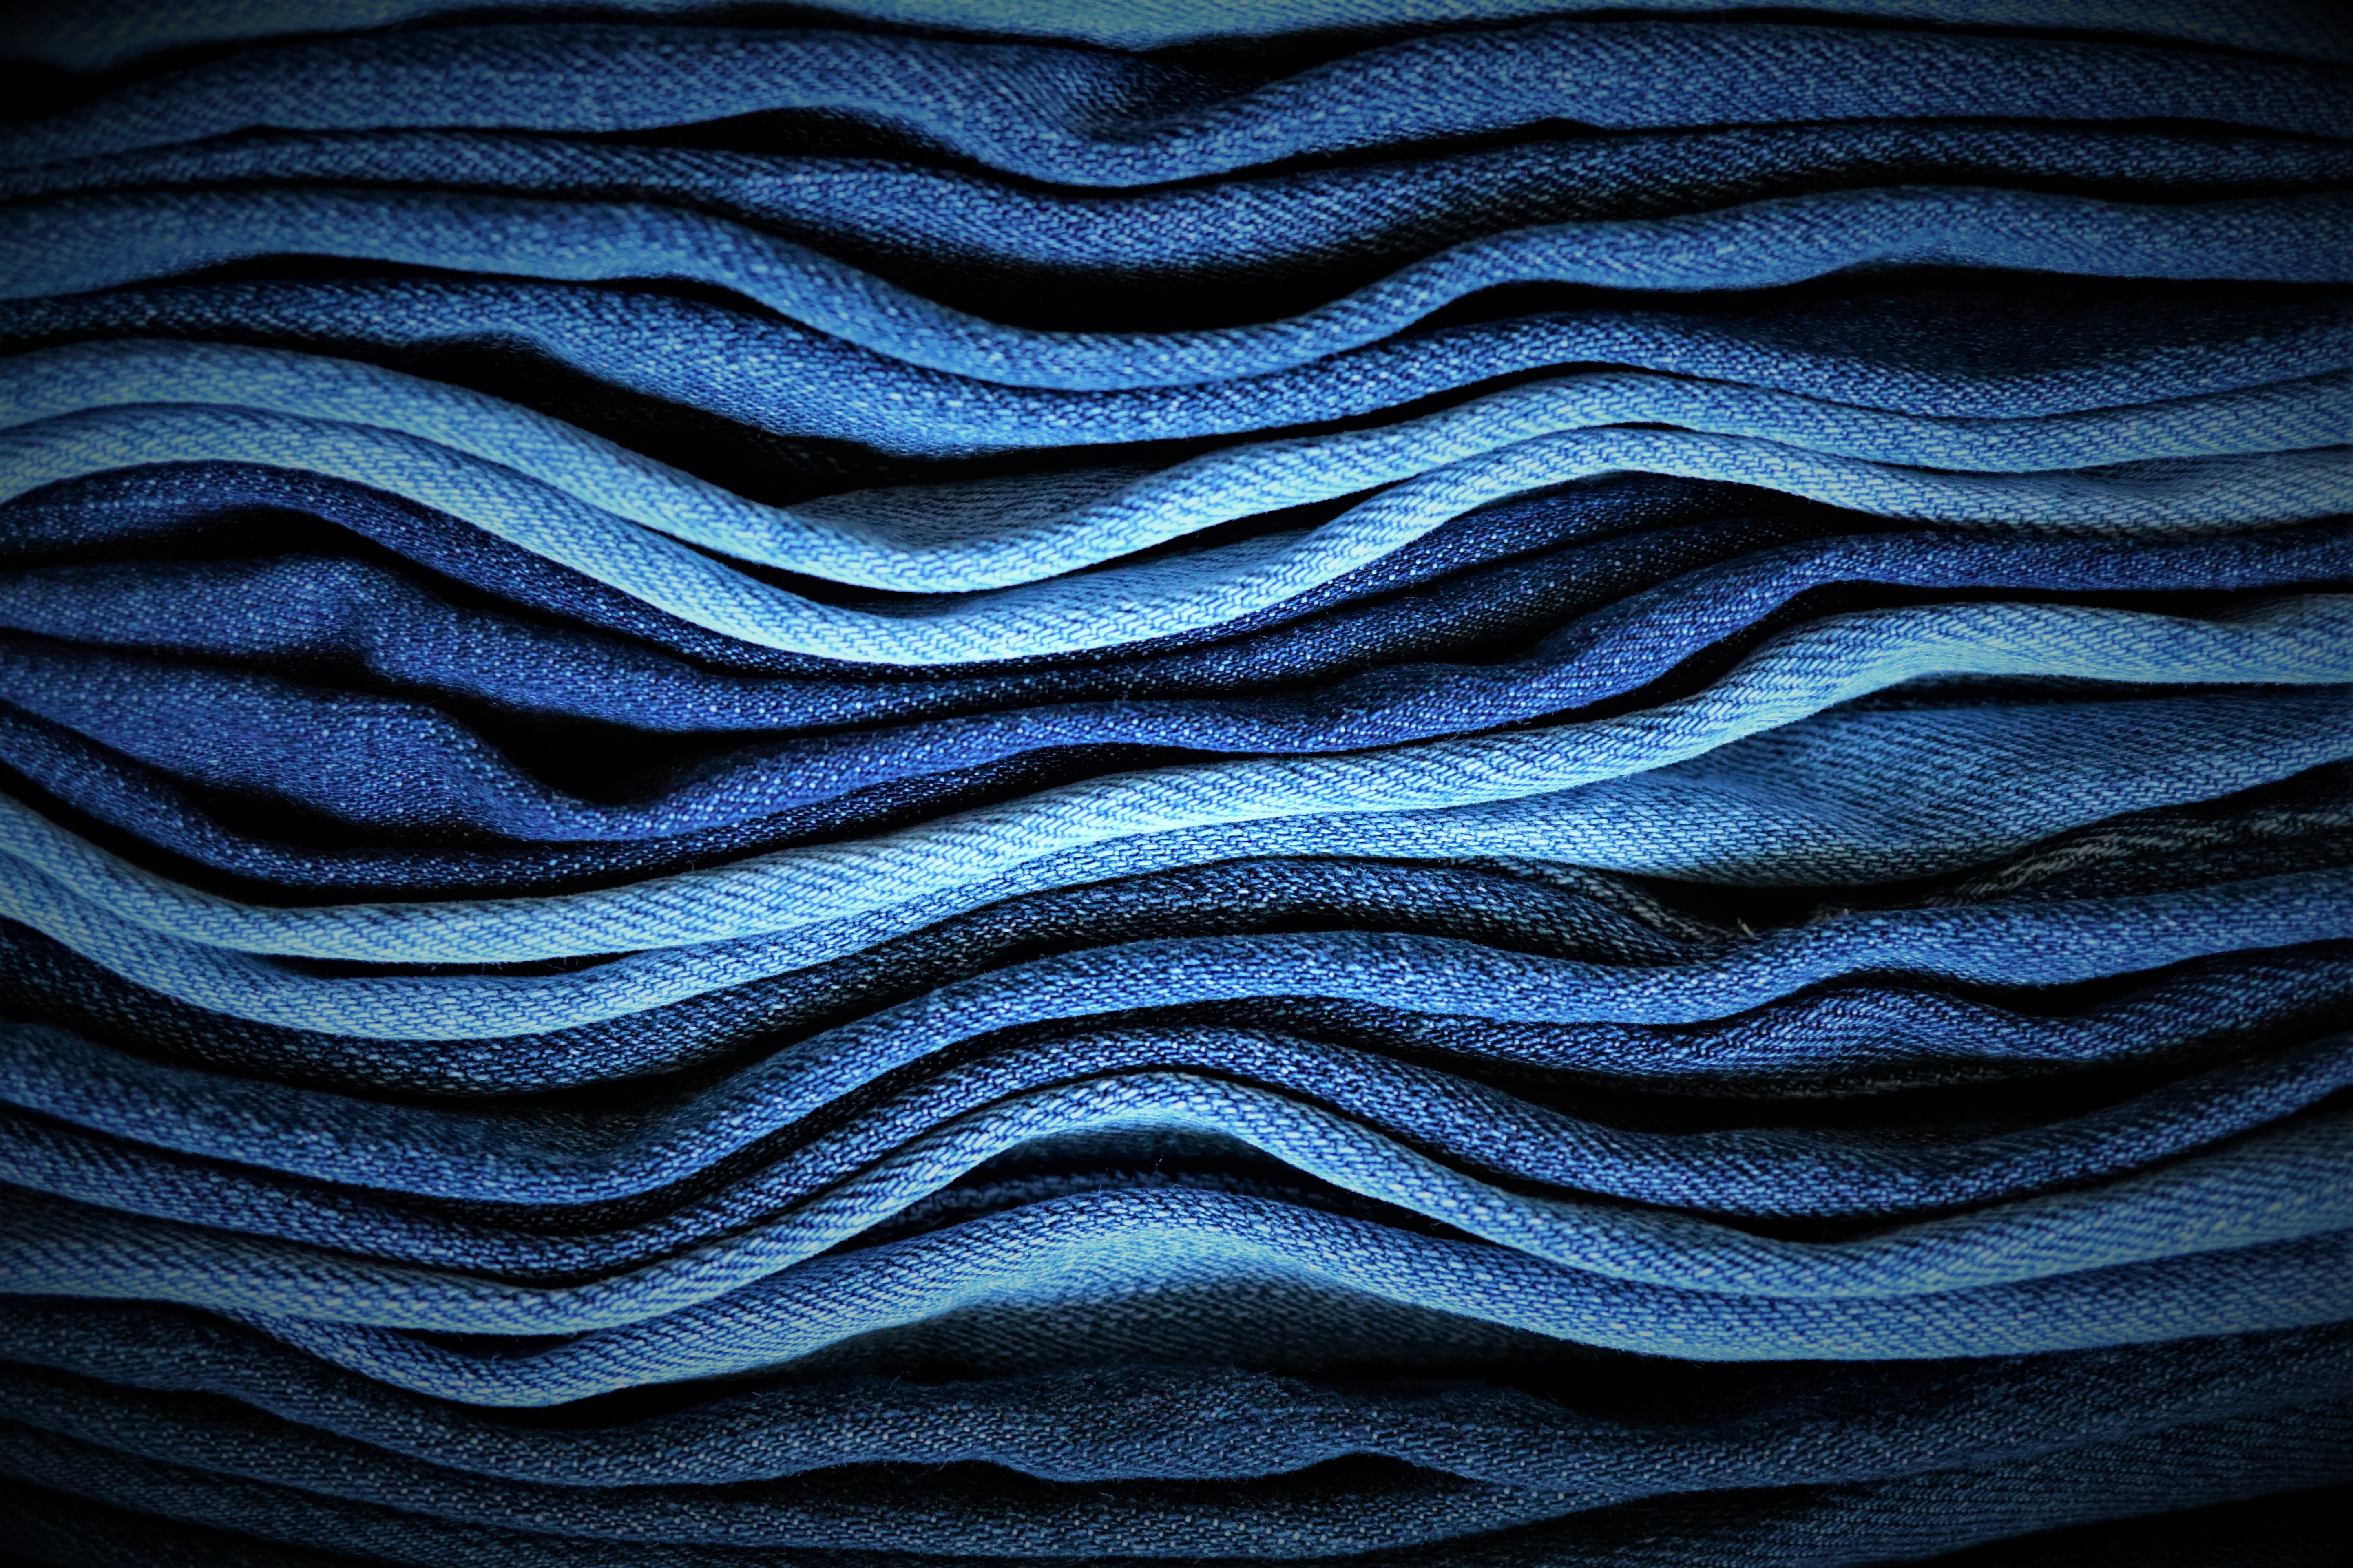 Blue Jeans Wallpaper 4K, Texture, Clothes, Fashion, Patterns, Trousers, Photography